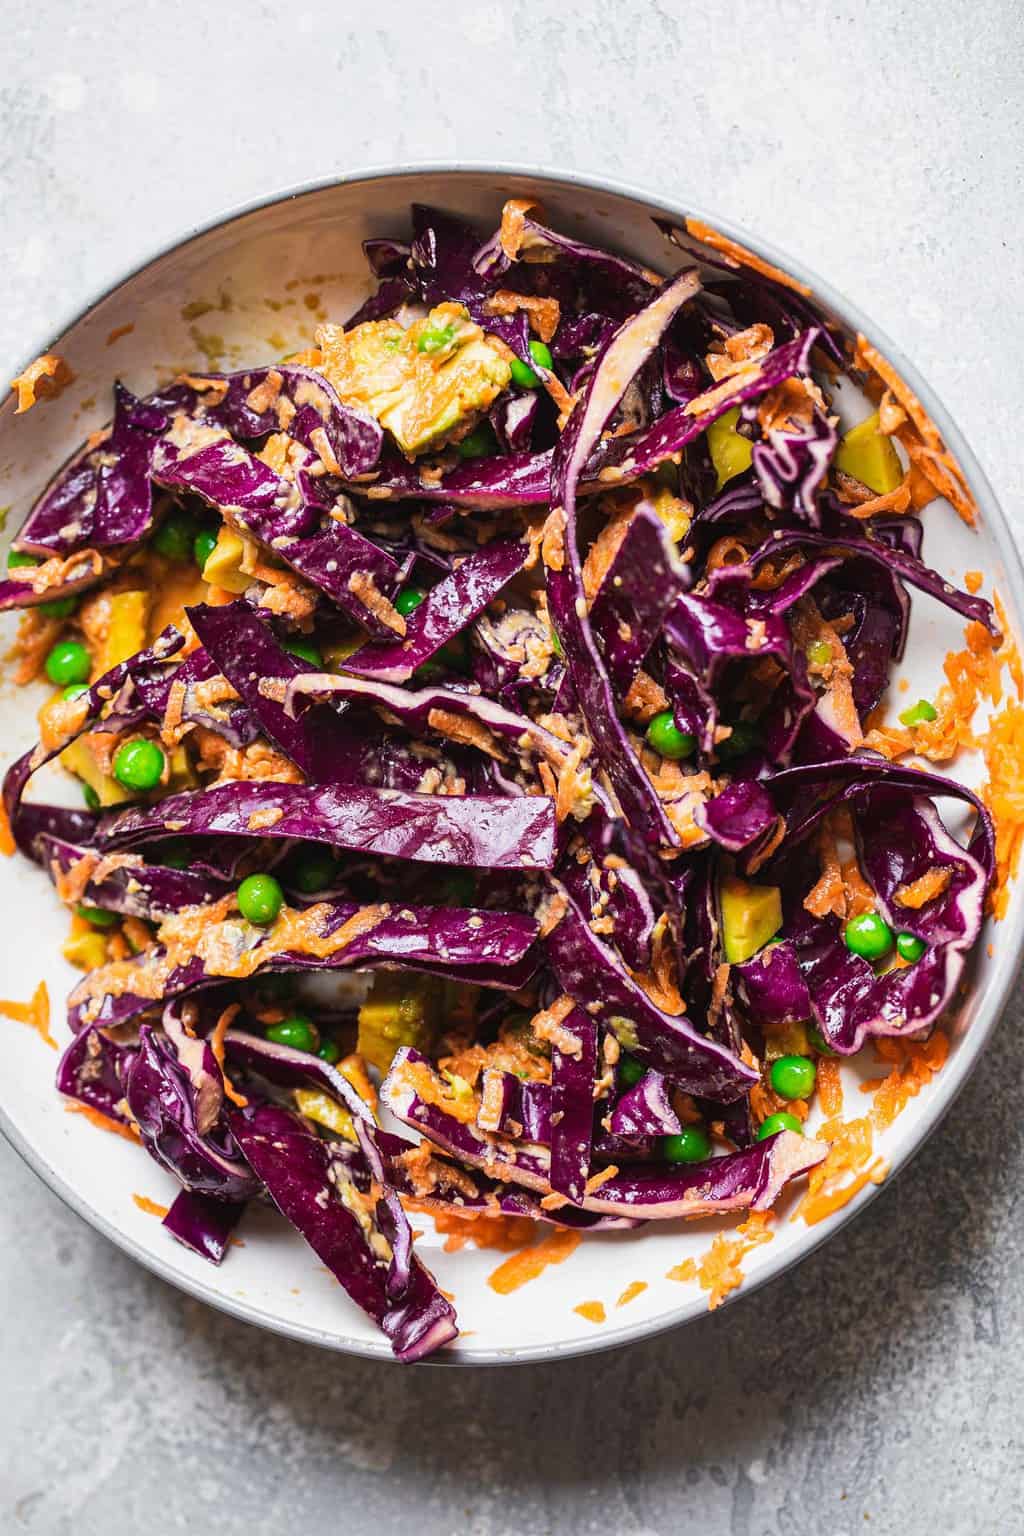 Slaw made with purple cabbage and carrots